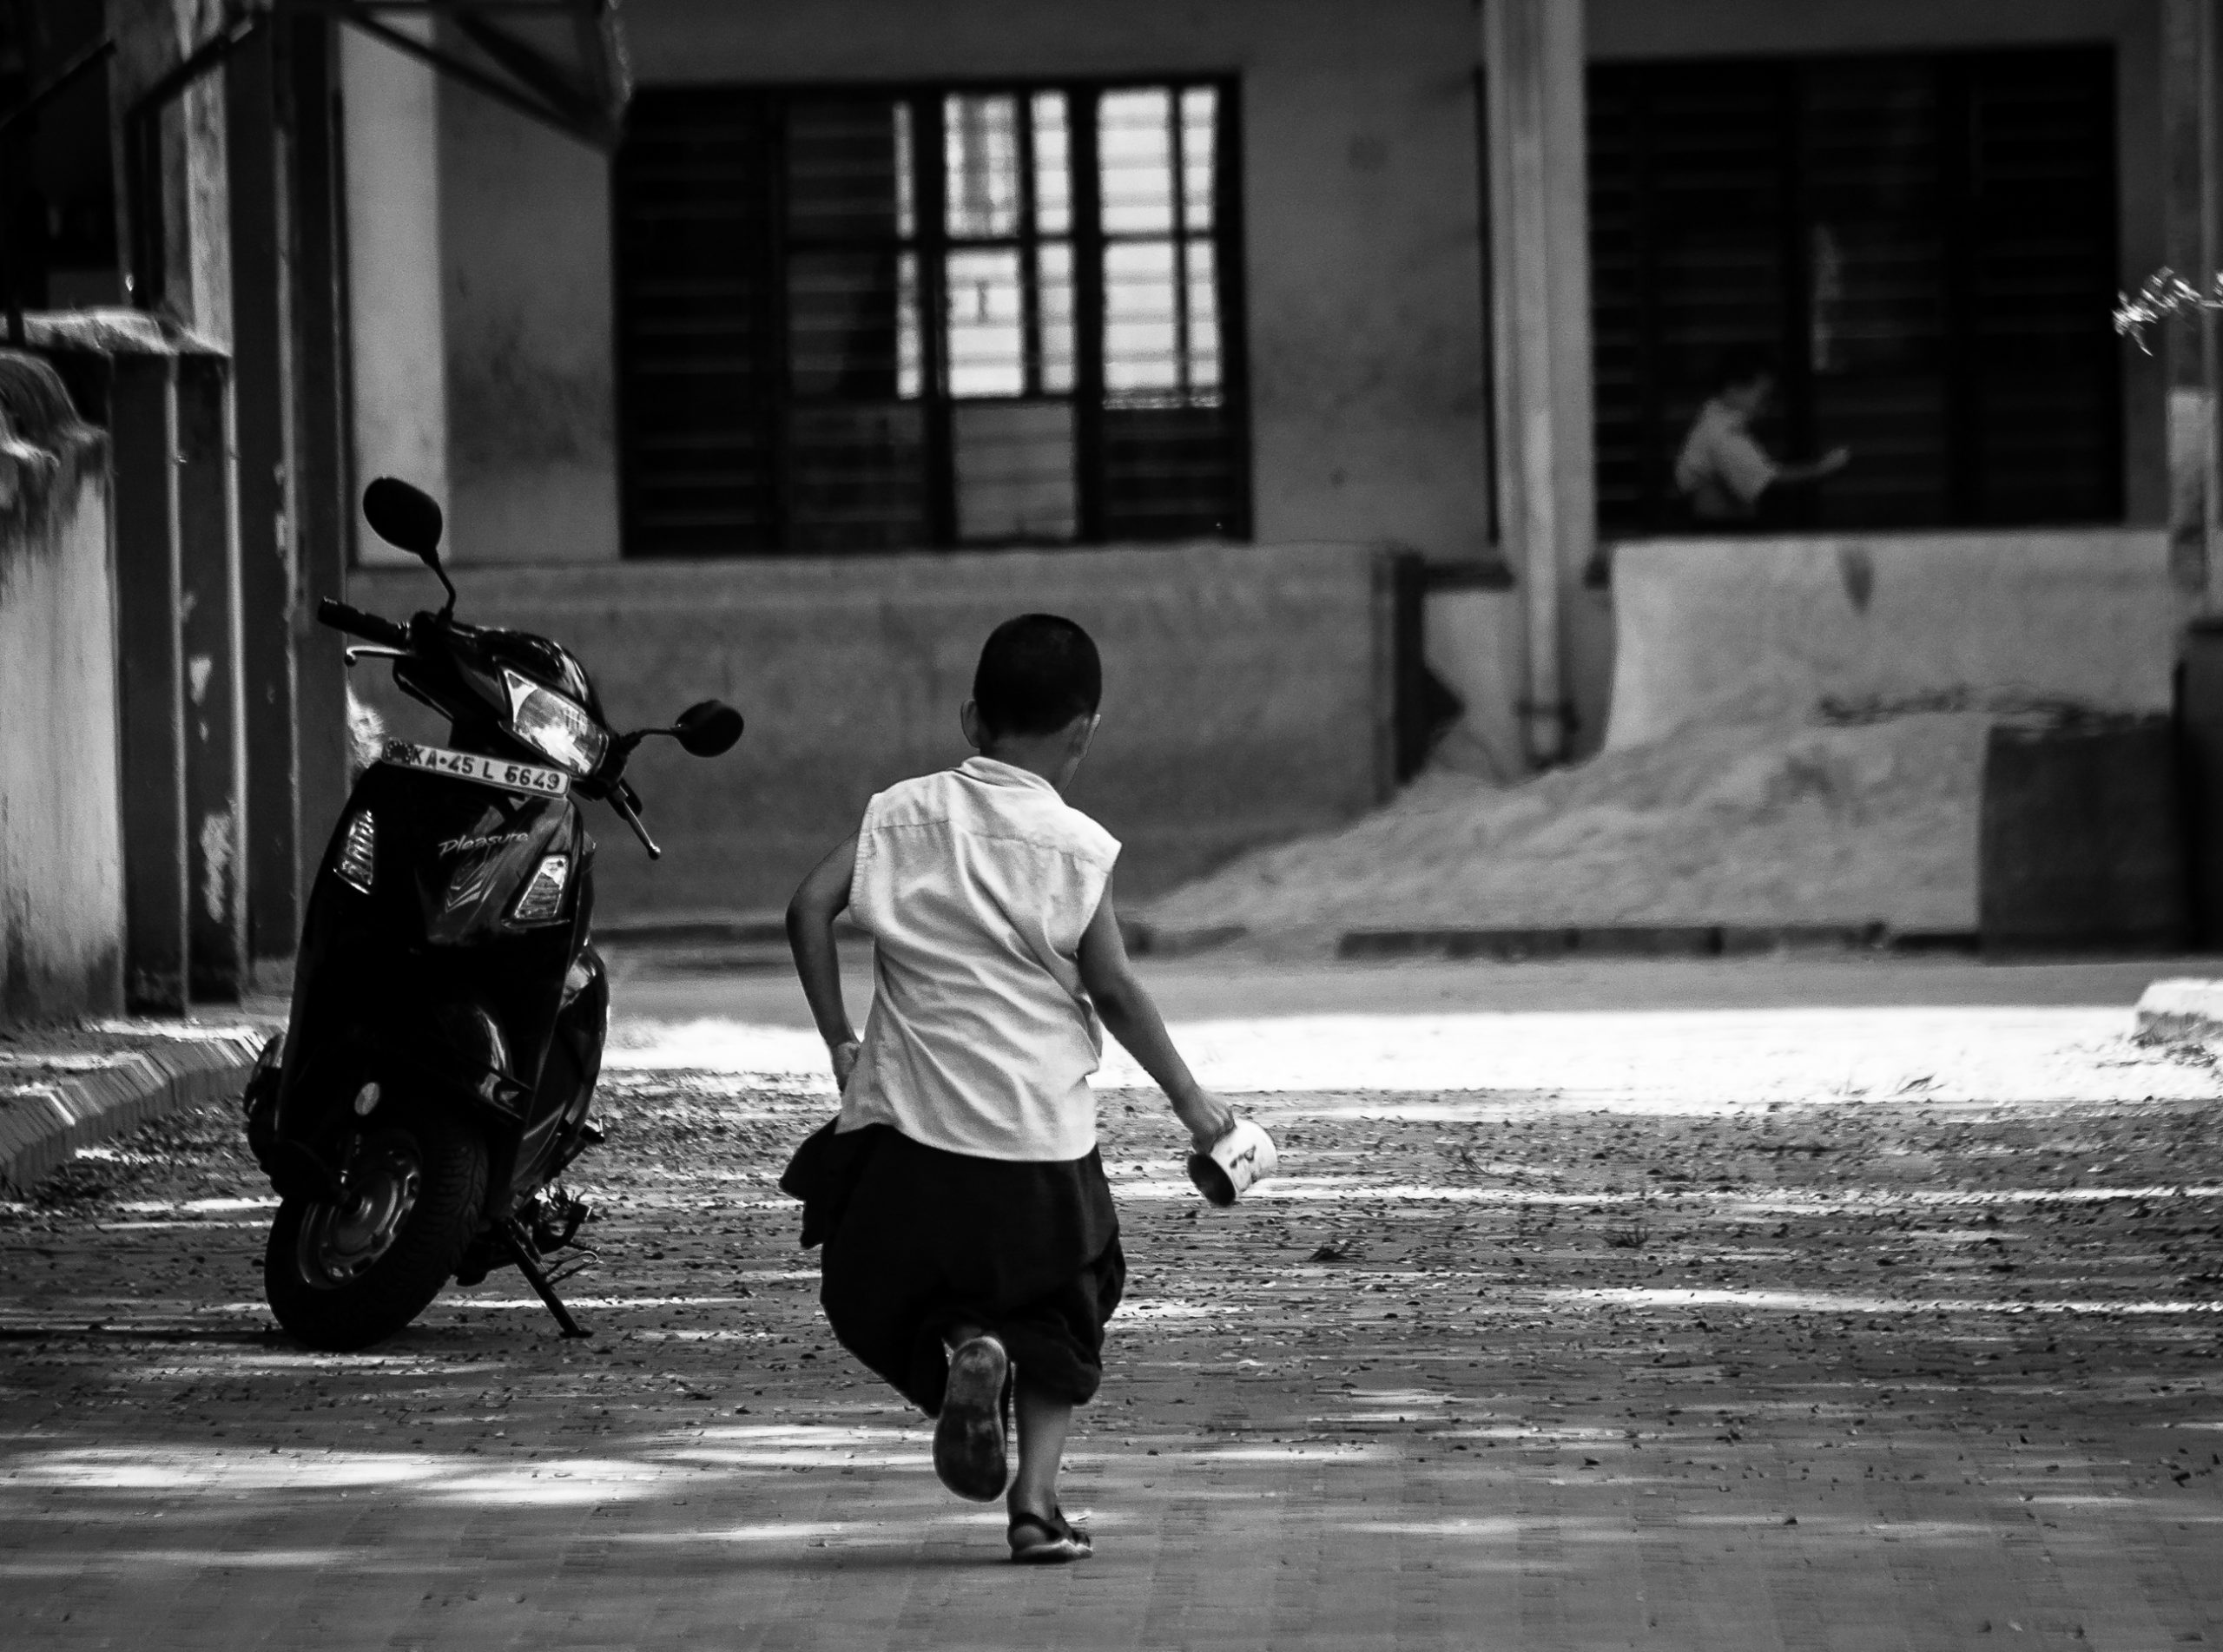 A boy playing in a street